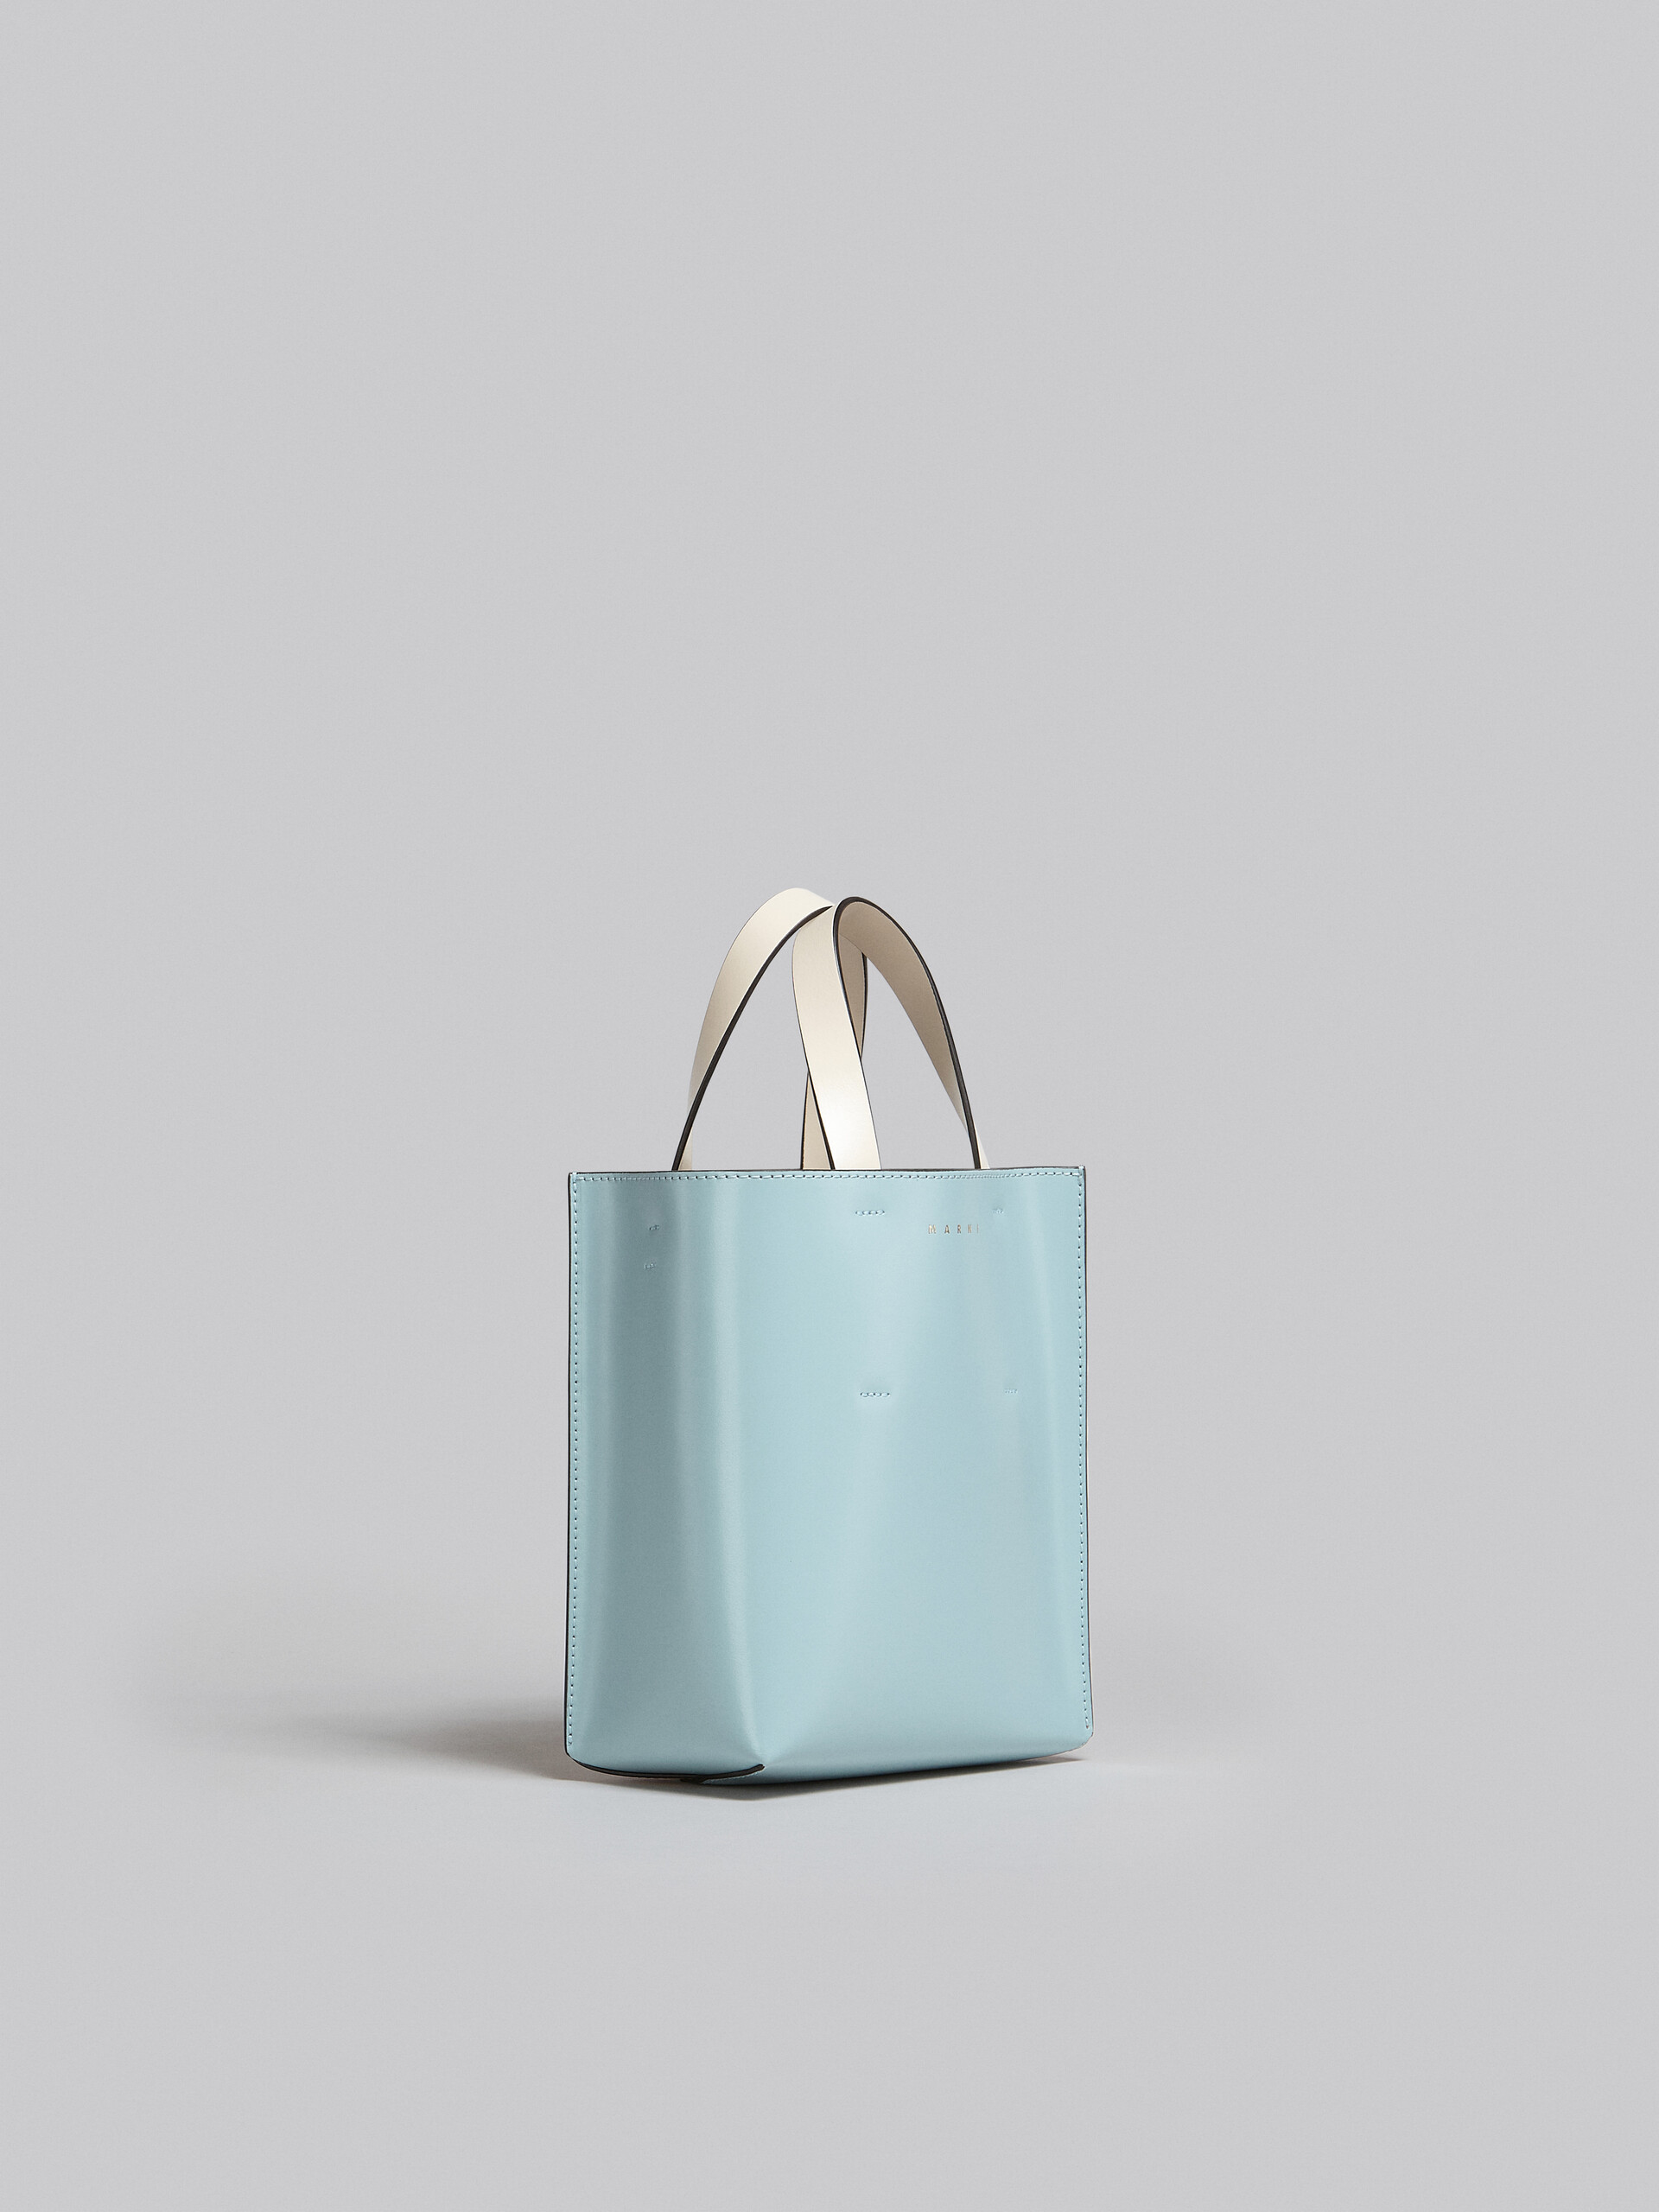 Museo Mini Bag in light blue orange and white leather - Shopping Bags - Image 6